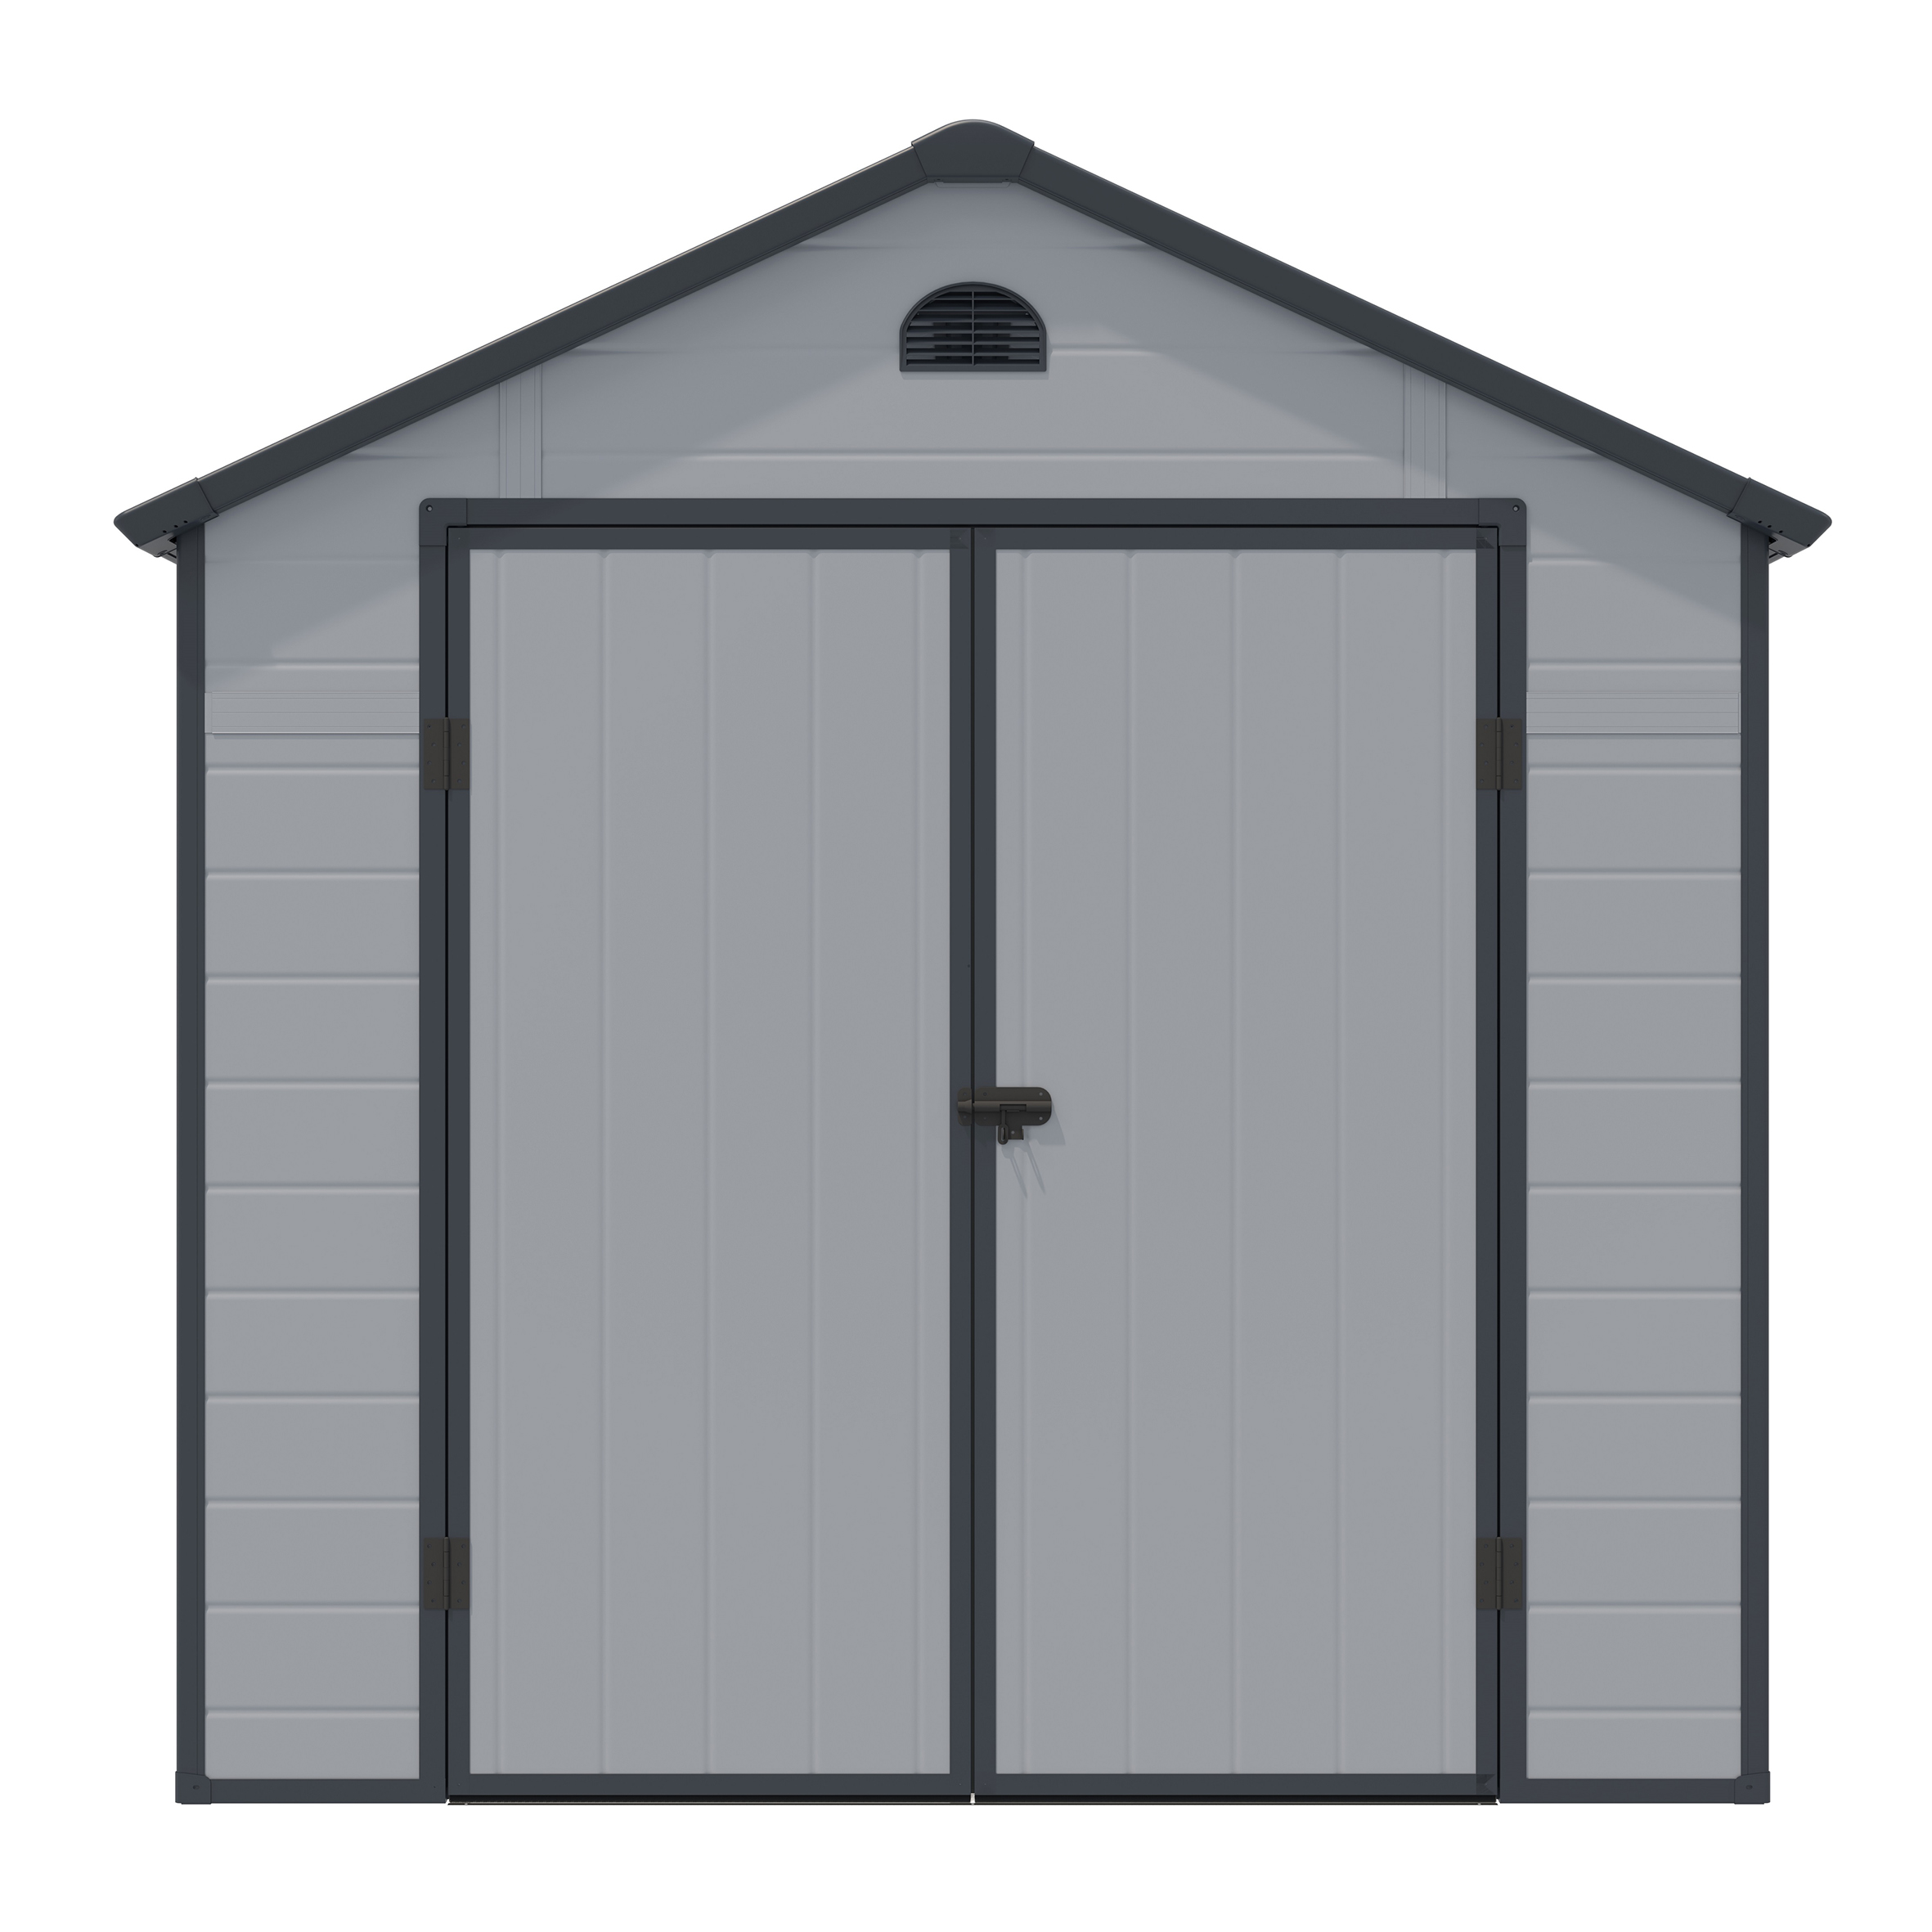 Featured image for “RGP | Airevale™ Apex Shed 8x6 (Light Grey)”